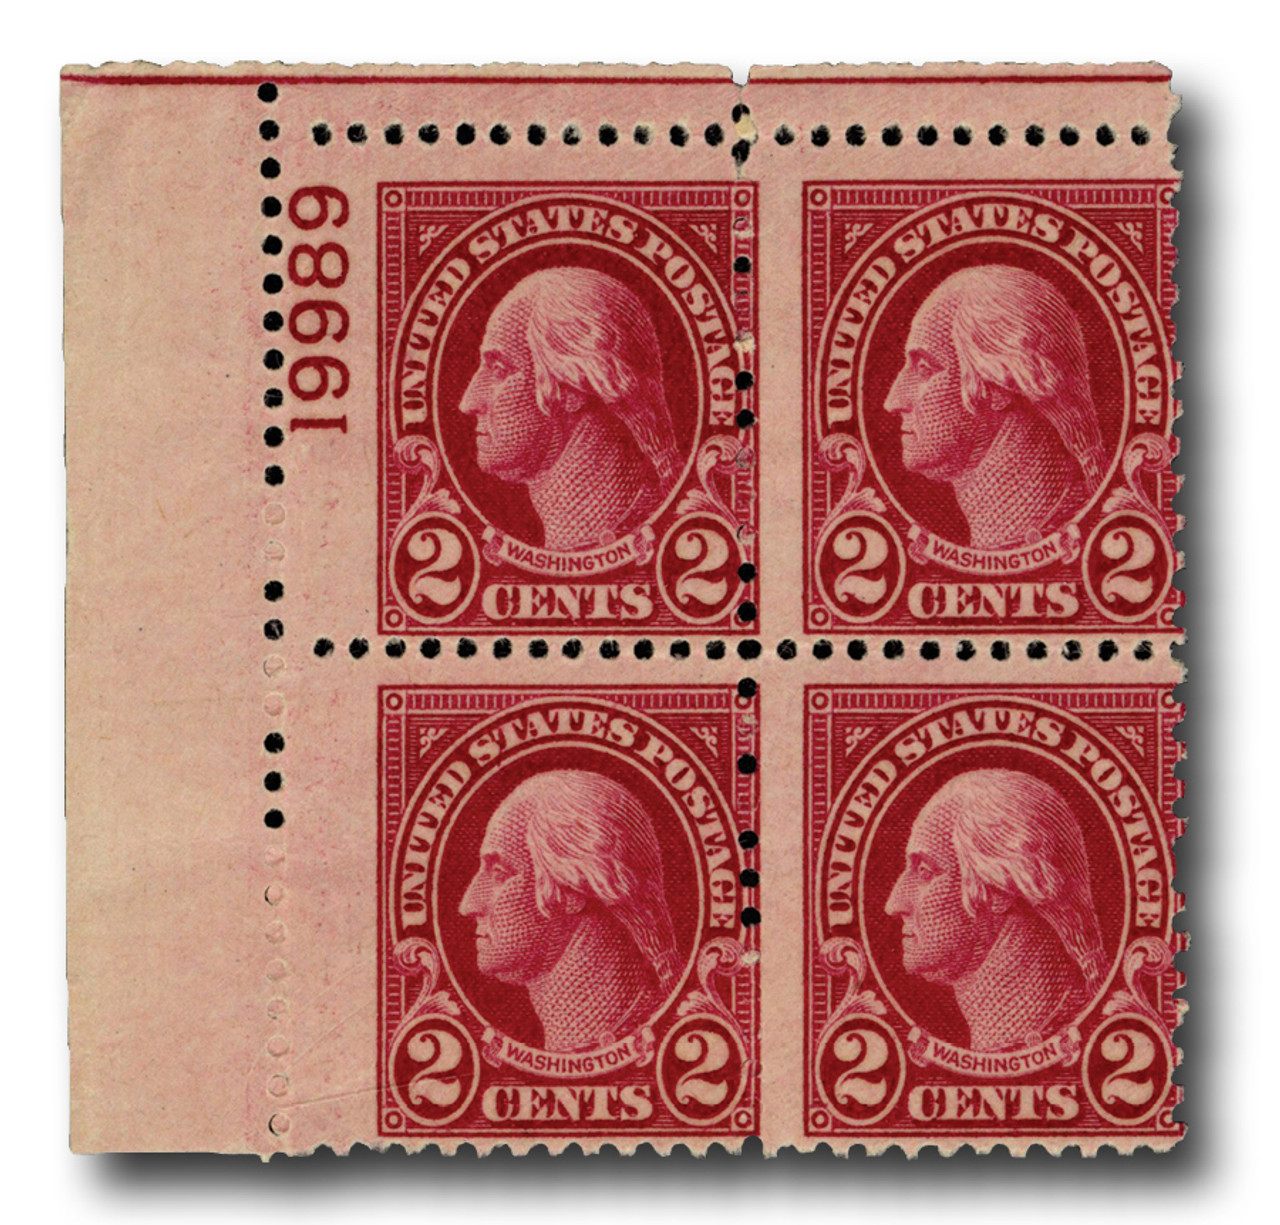 Famous Historic Sites: Washington, DC - A Collection of Mint U.S. Postage  Stamps